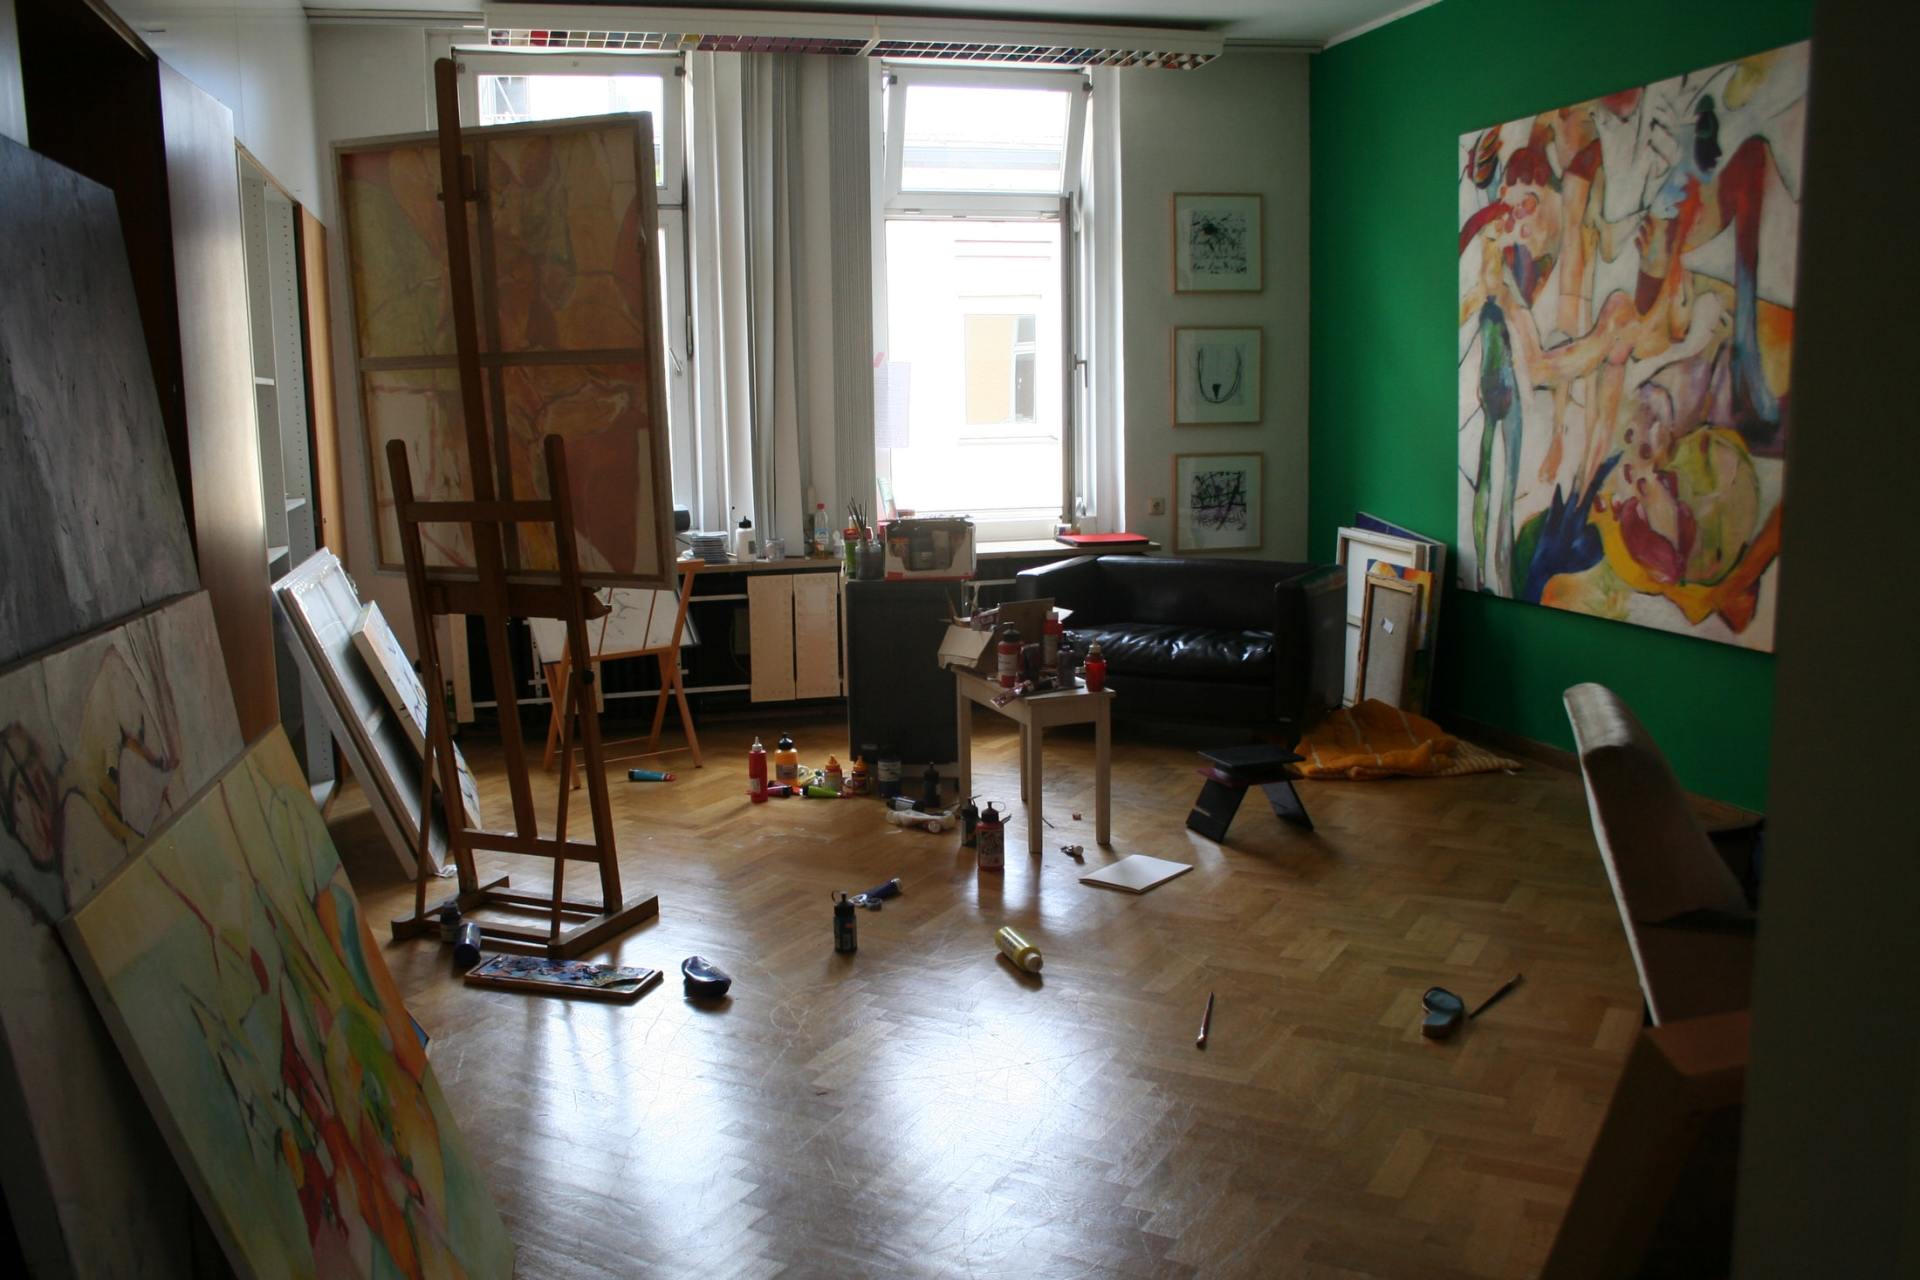 This is a photo of a living room with art pieces hanging on the walls.